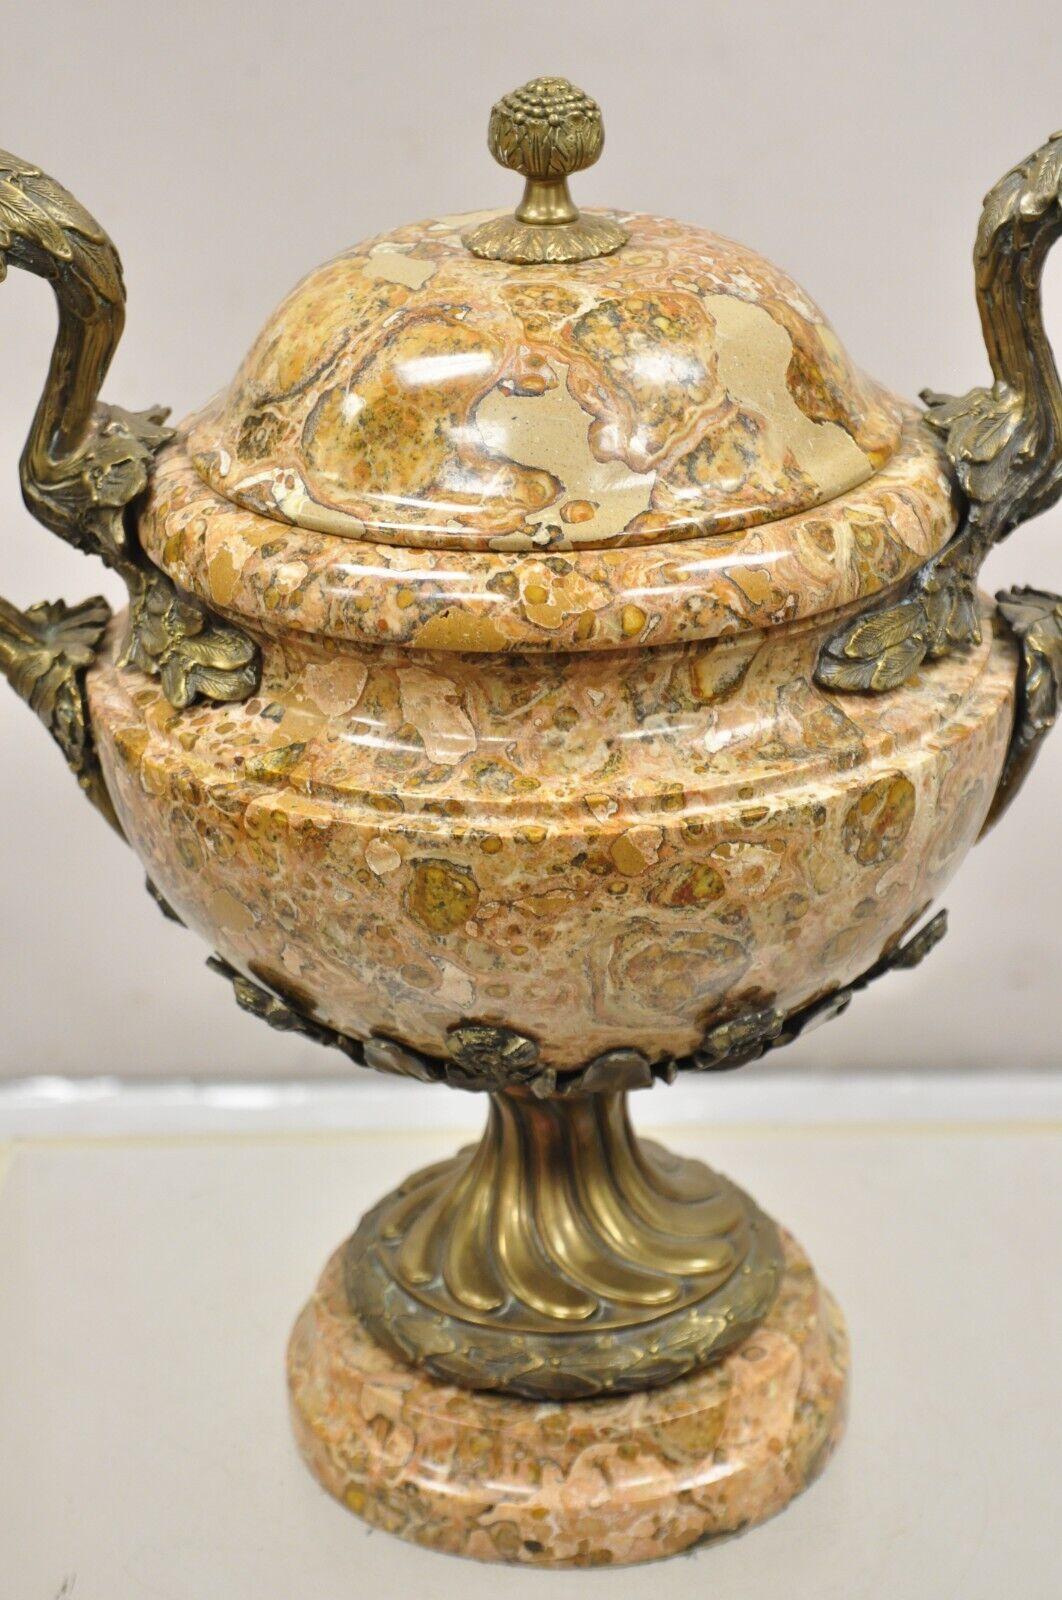 Vintage Bronze and Marble French Baroque Style Lidded Urn Centerpiece Cassolette. Item features Heavy marble and bronze construction, scrolling leafy arms, removable lid, very nice centerpiece. Approx. 40 lbs. Circa Late 20th Century. Measurements: